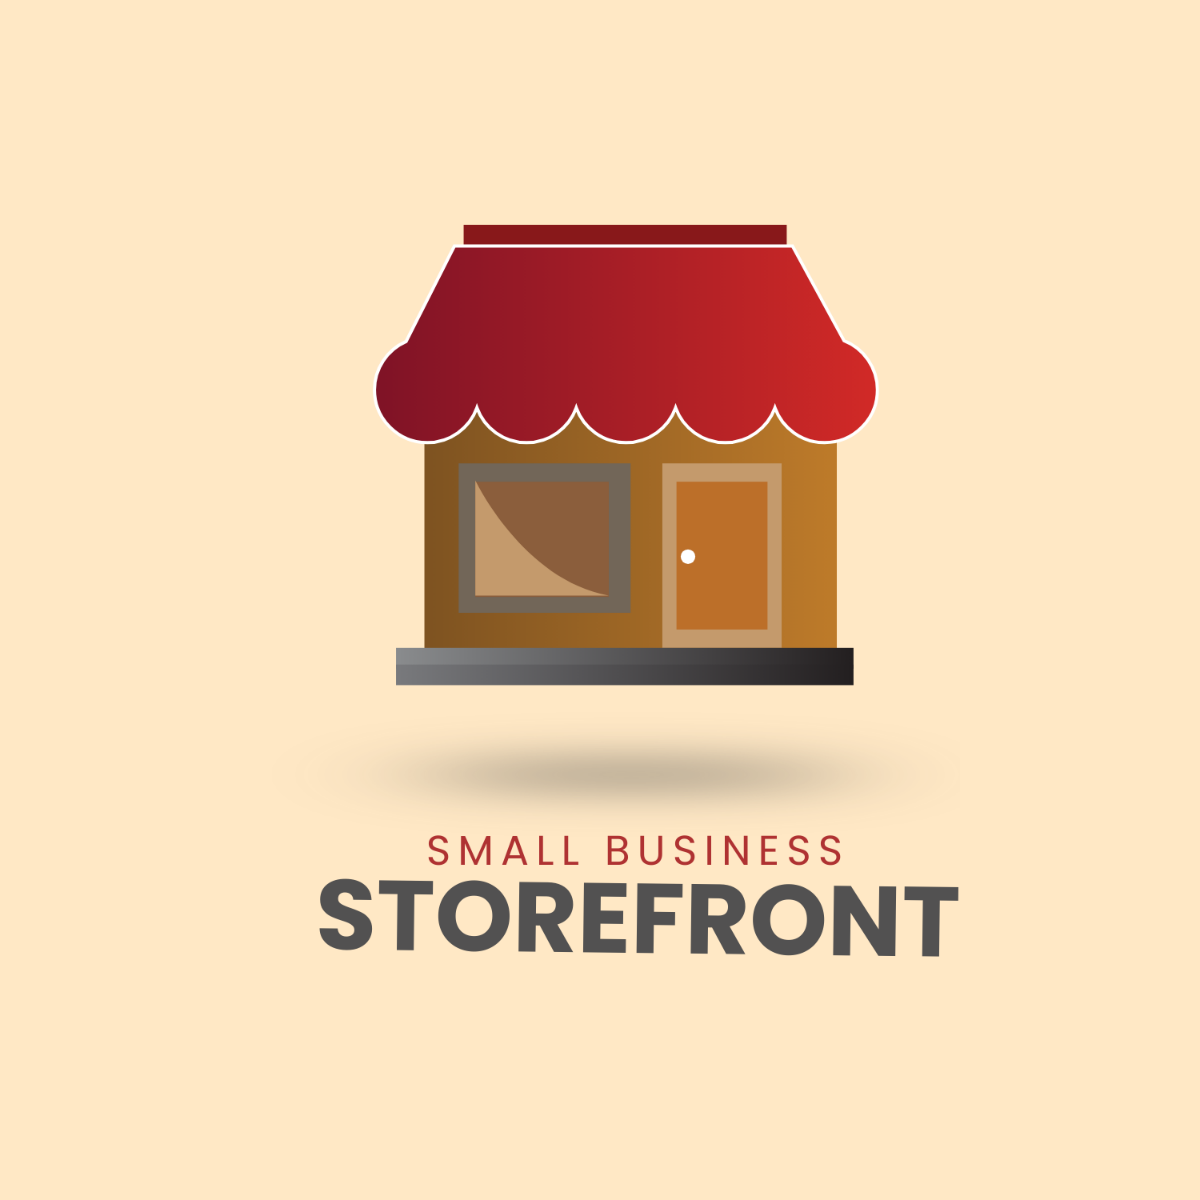 Small Business Storefront Logo Template